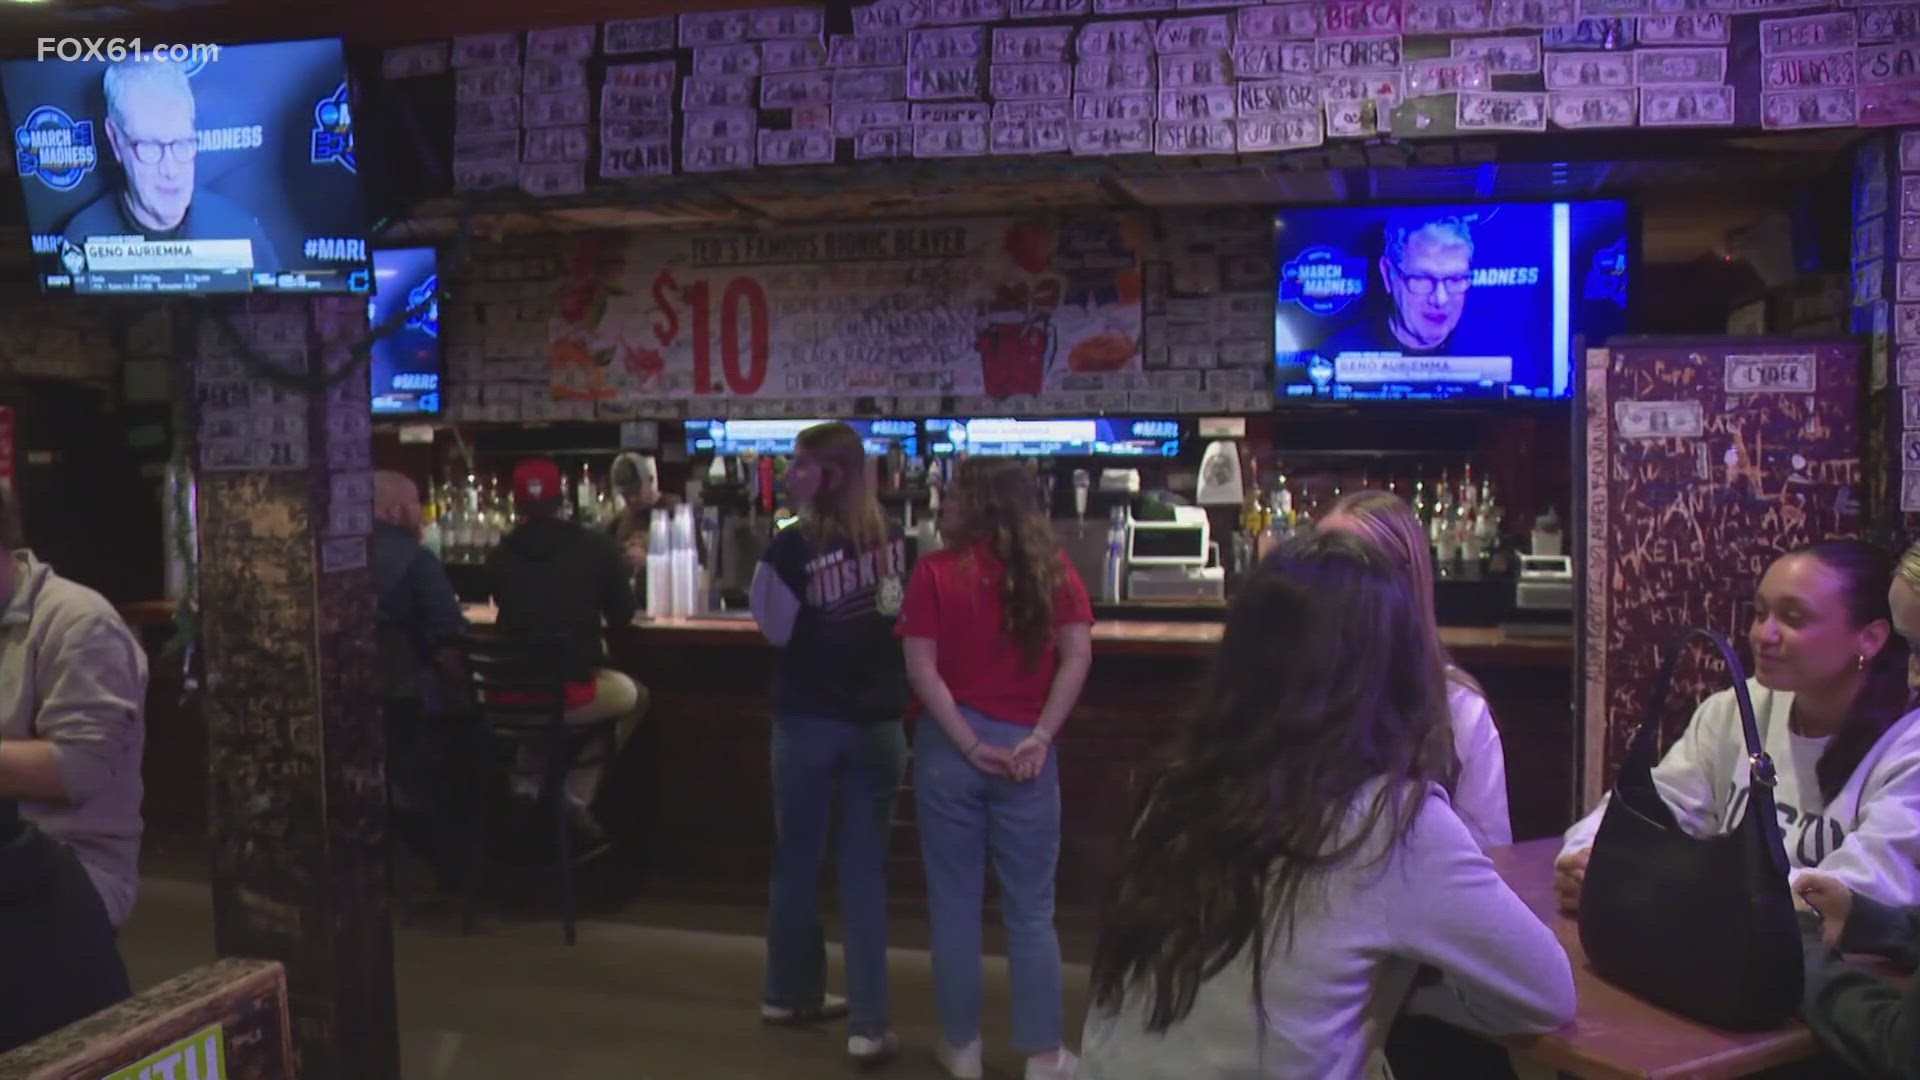 The spirit of UConn nation is alive and well in Storrs as fans showed up early Monday to Ted's Restaurant and Bar on campus to watch the women's basketball game.